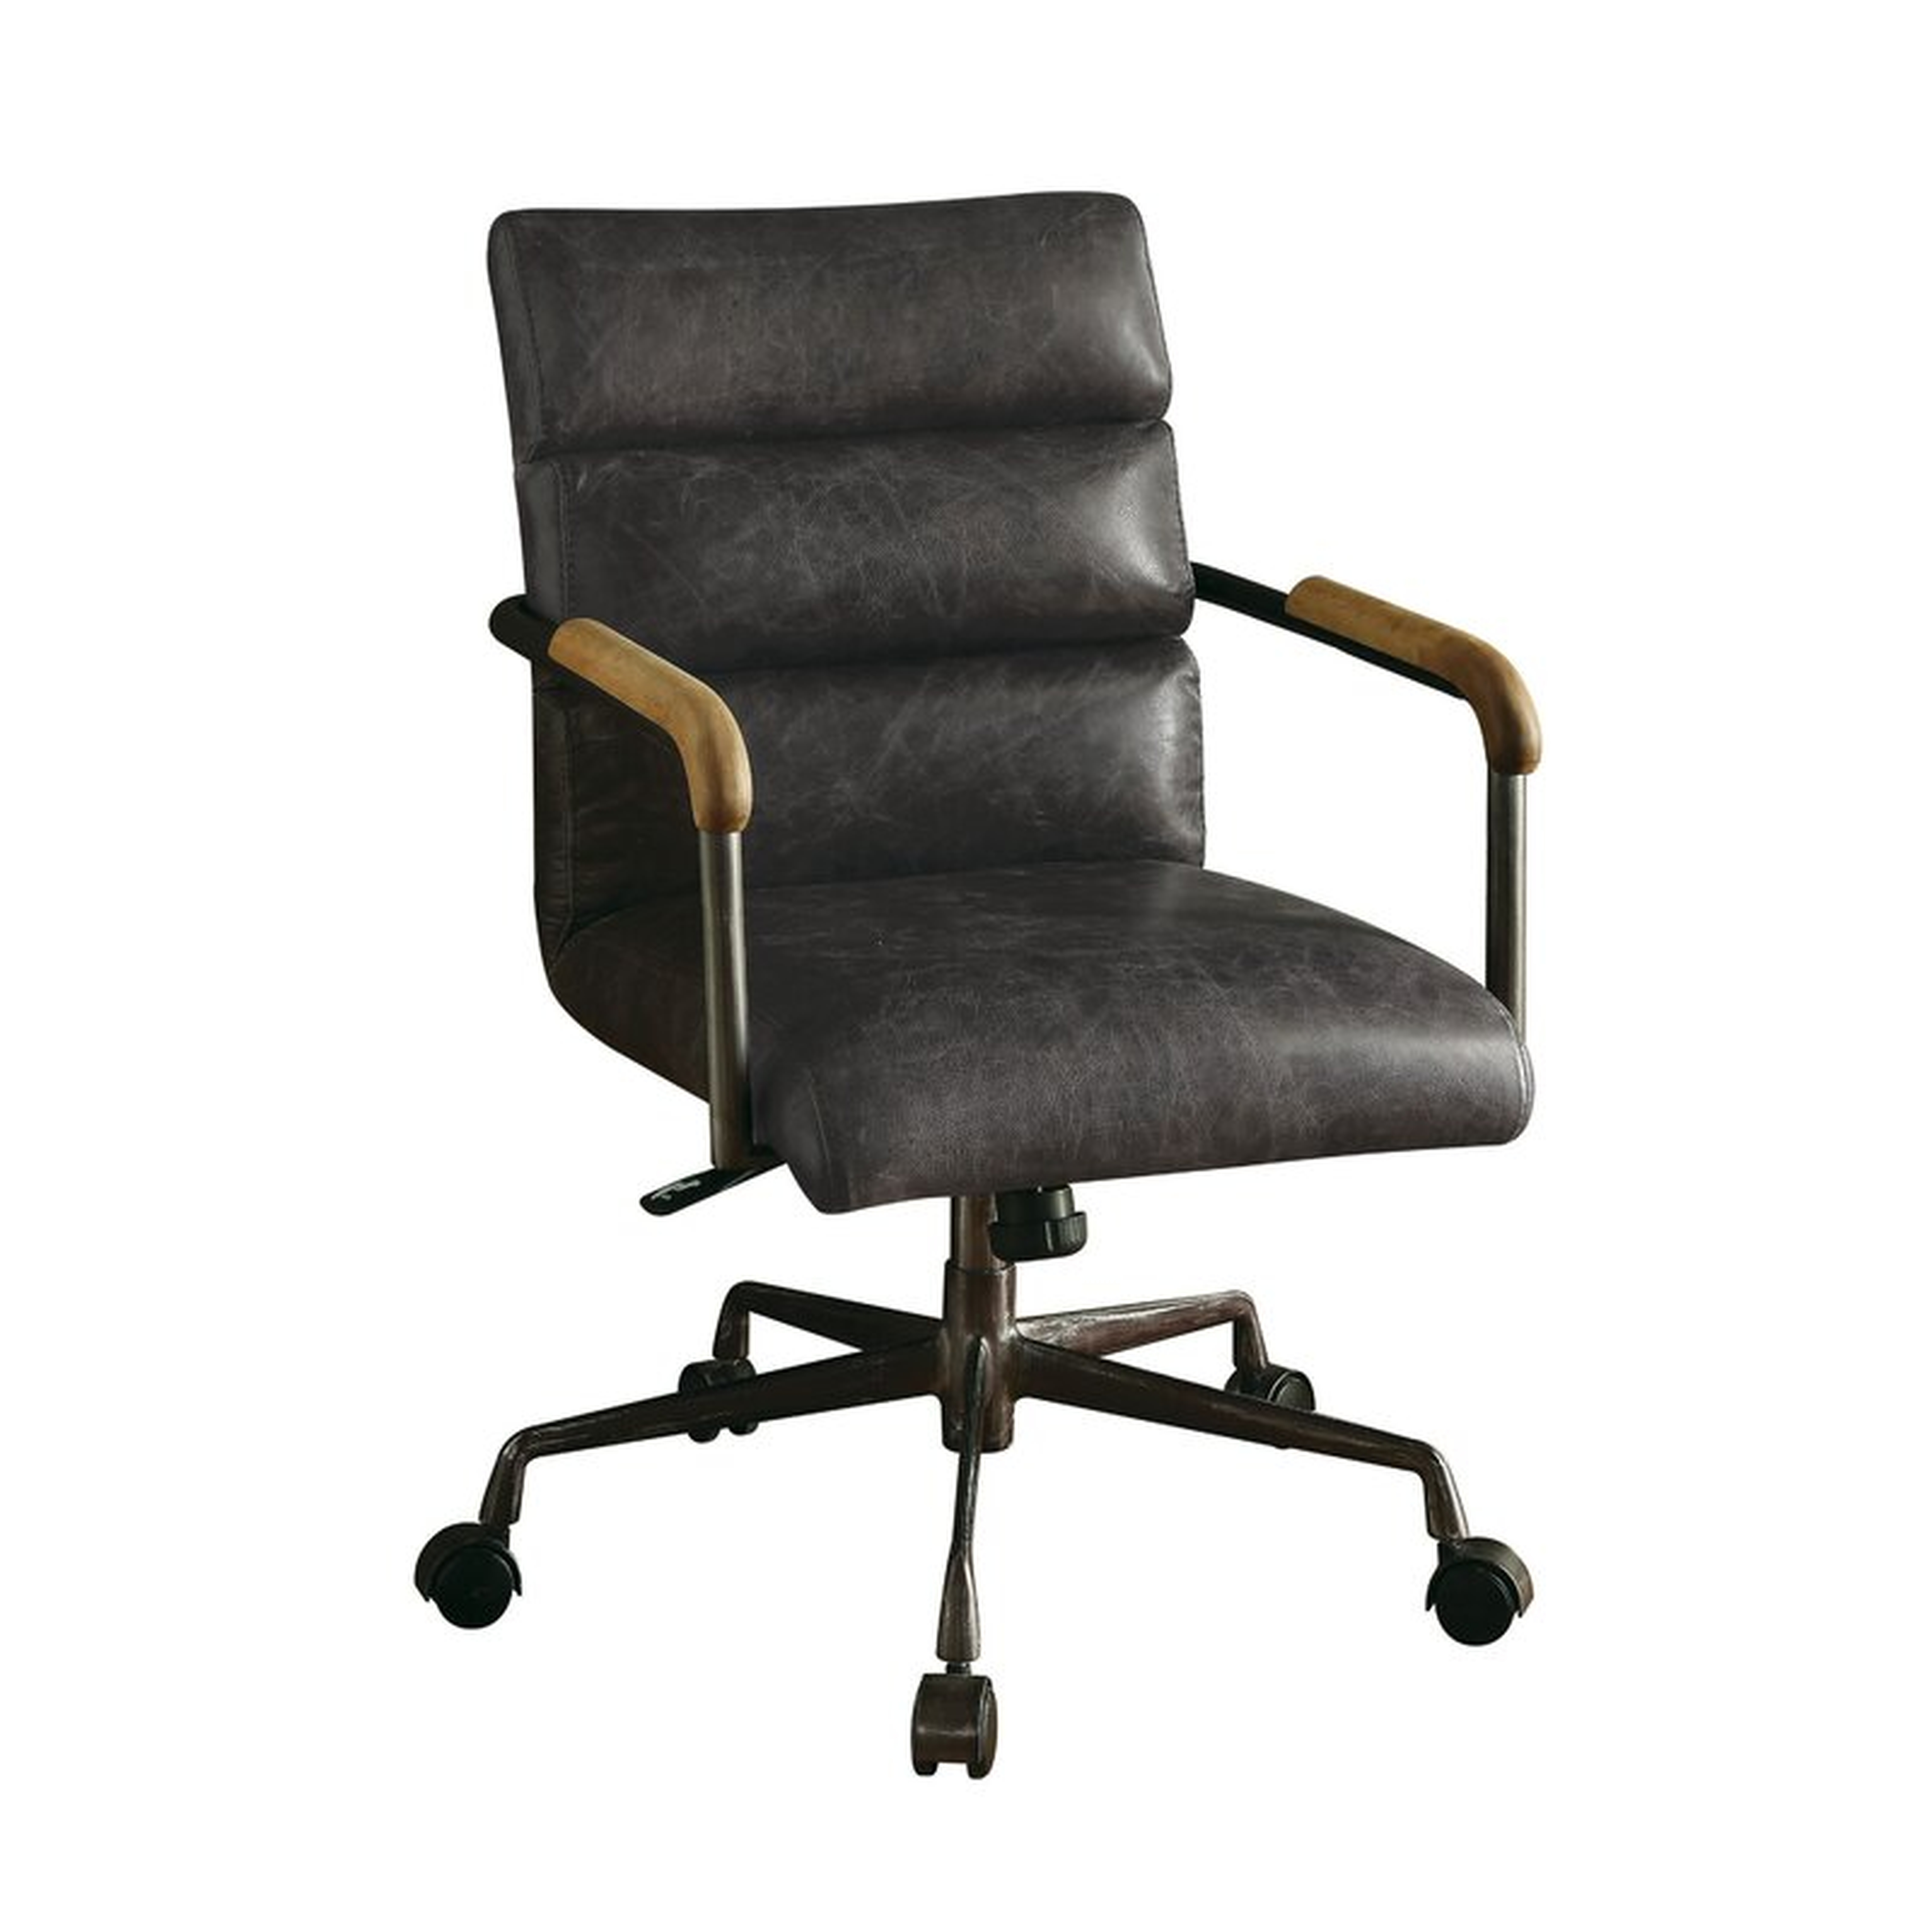 Sophia Genuine Leather Conference Chair - Birch Lane